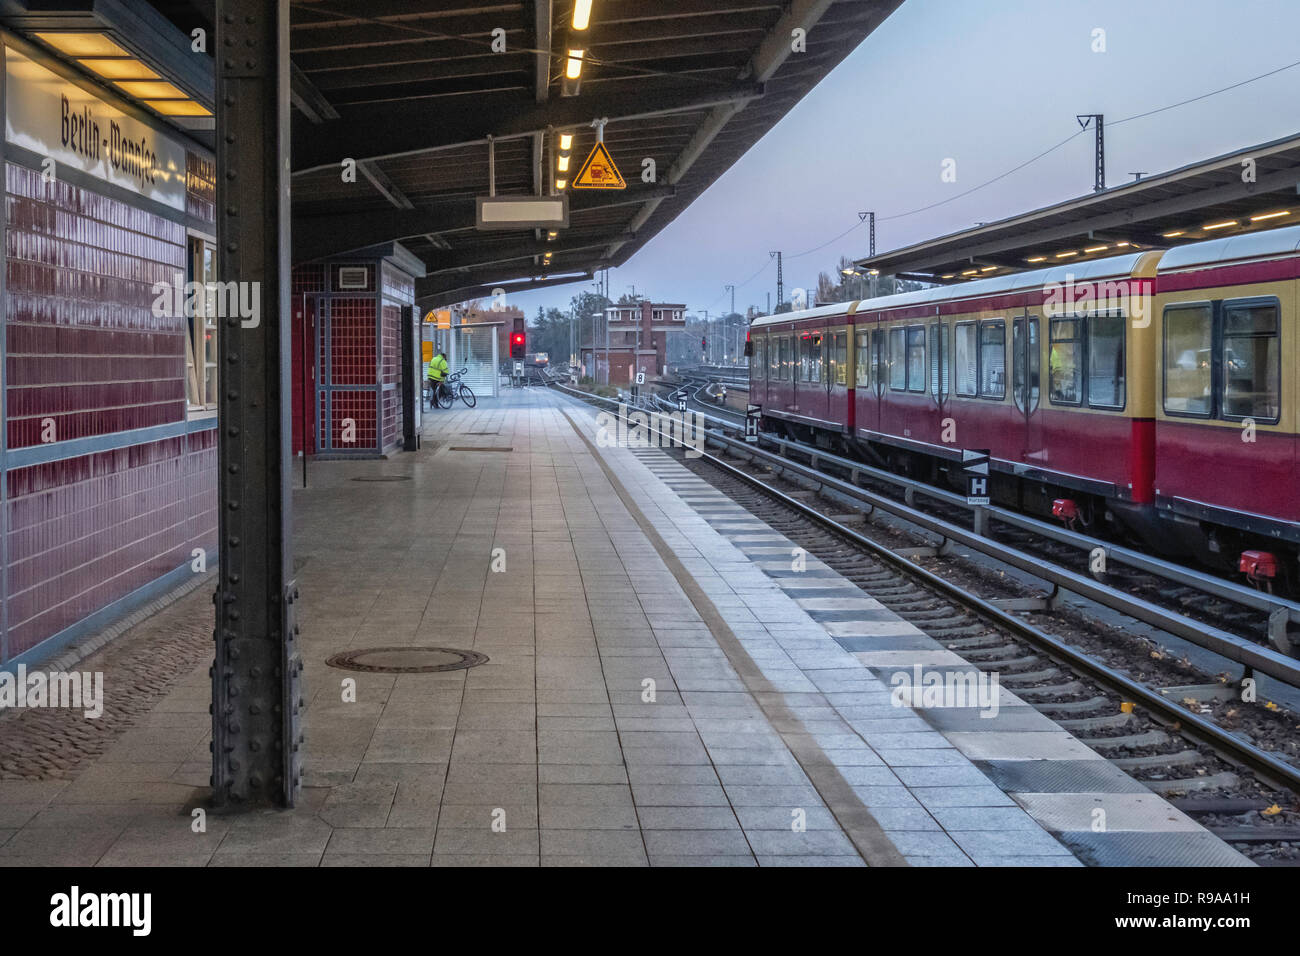 Berlin-Wannsee railway station platform. Important junction in the commuter transport network serving the S-bahn and Deutsche Bahn train services.     Stock Photo